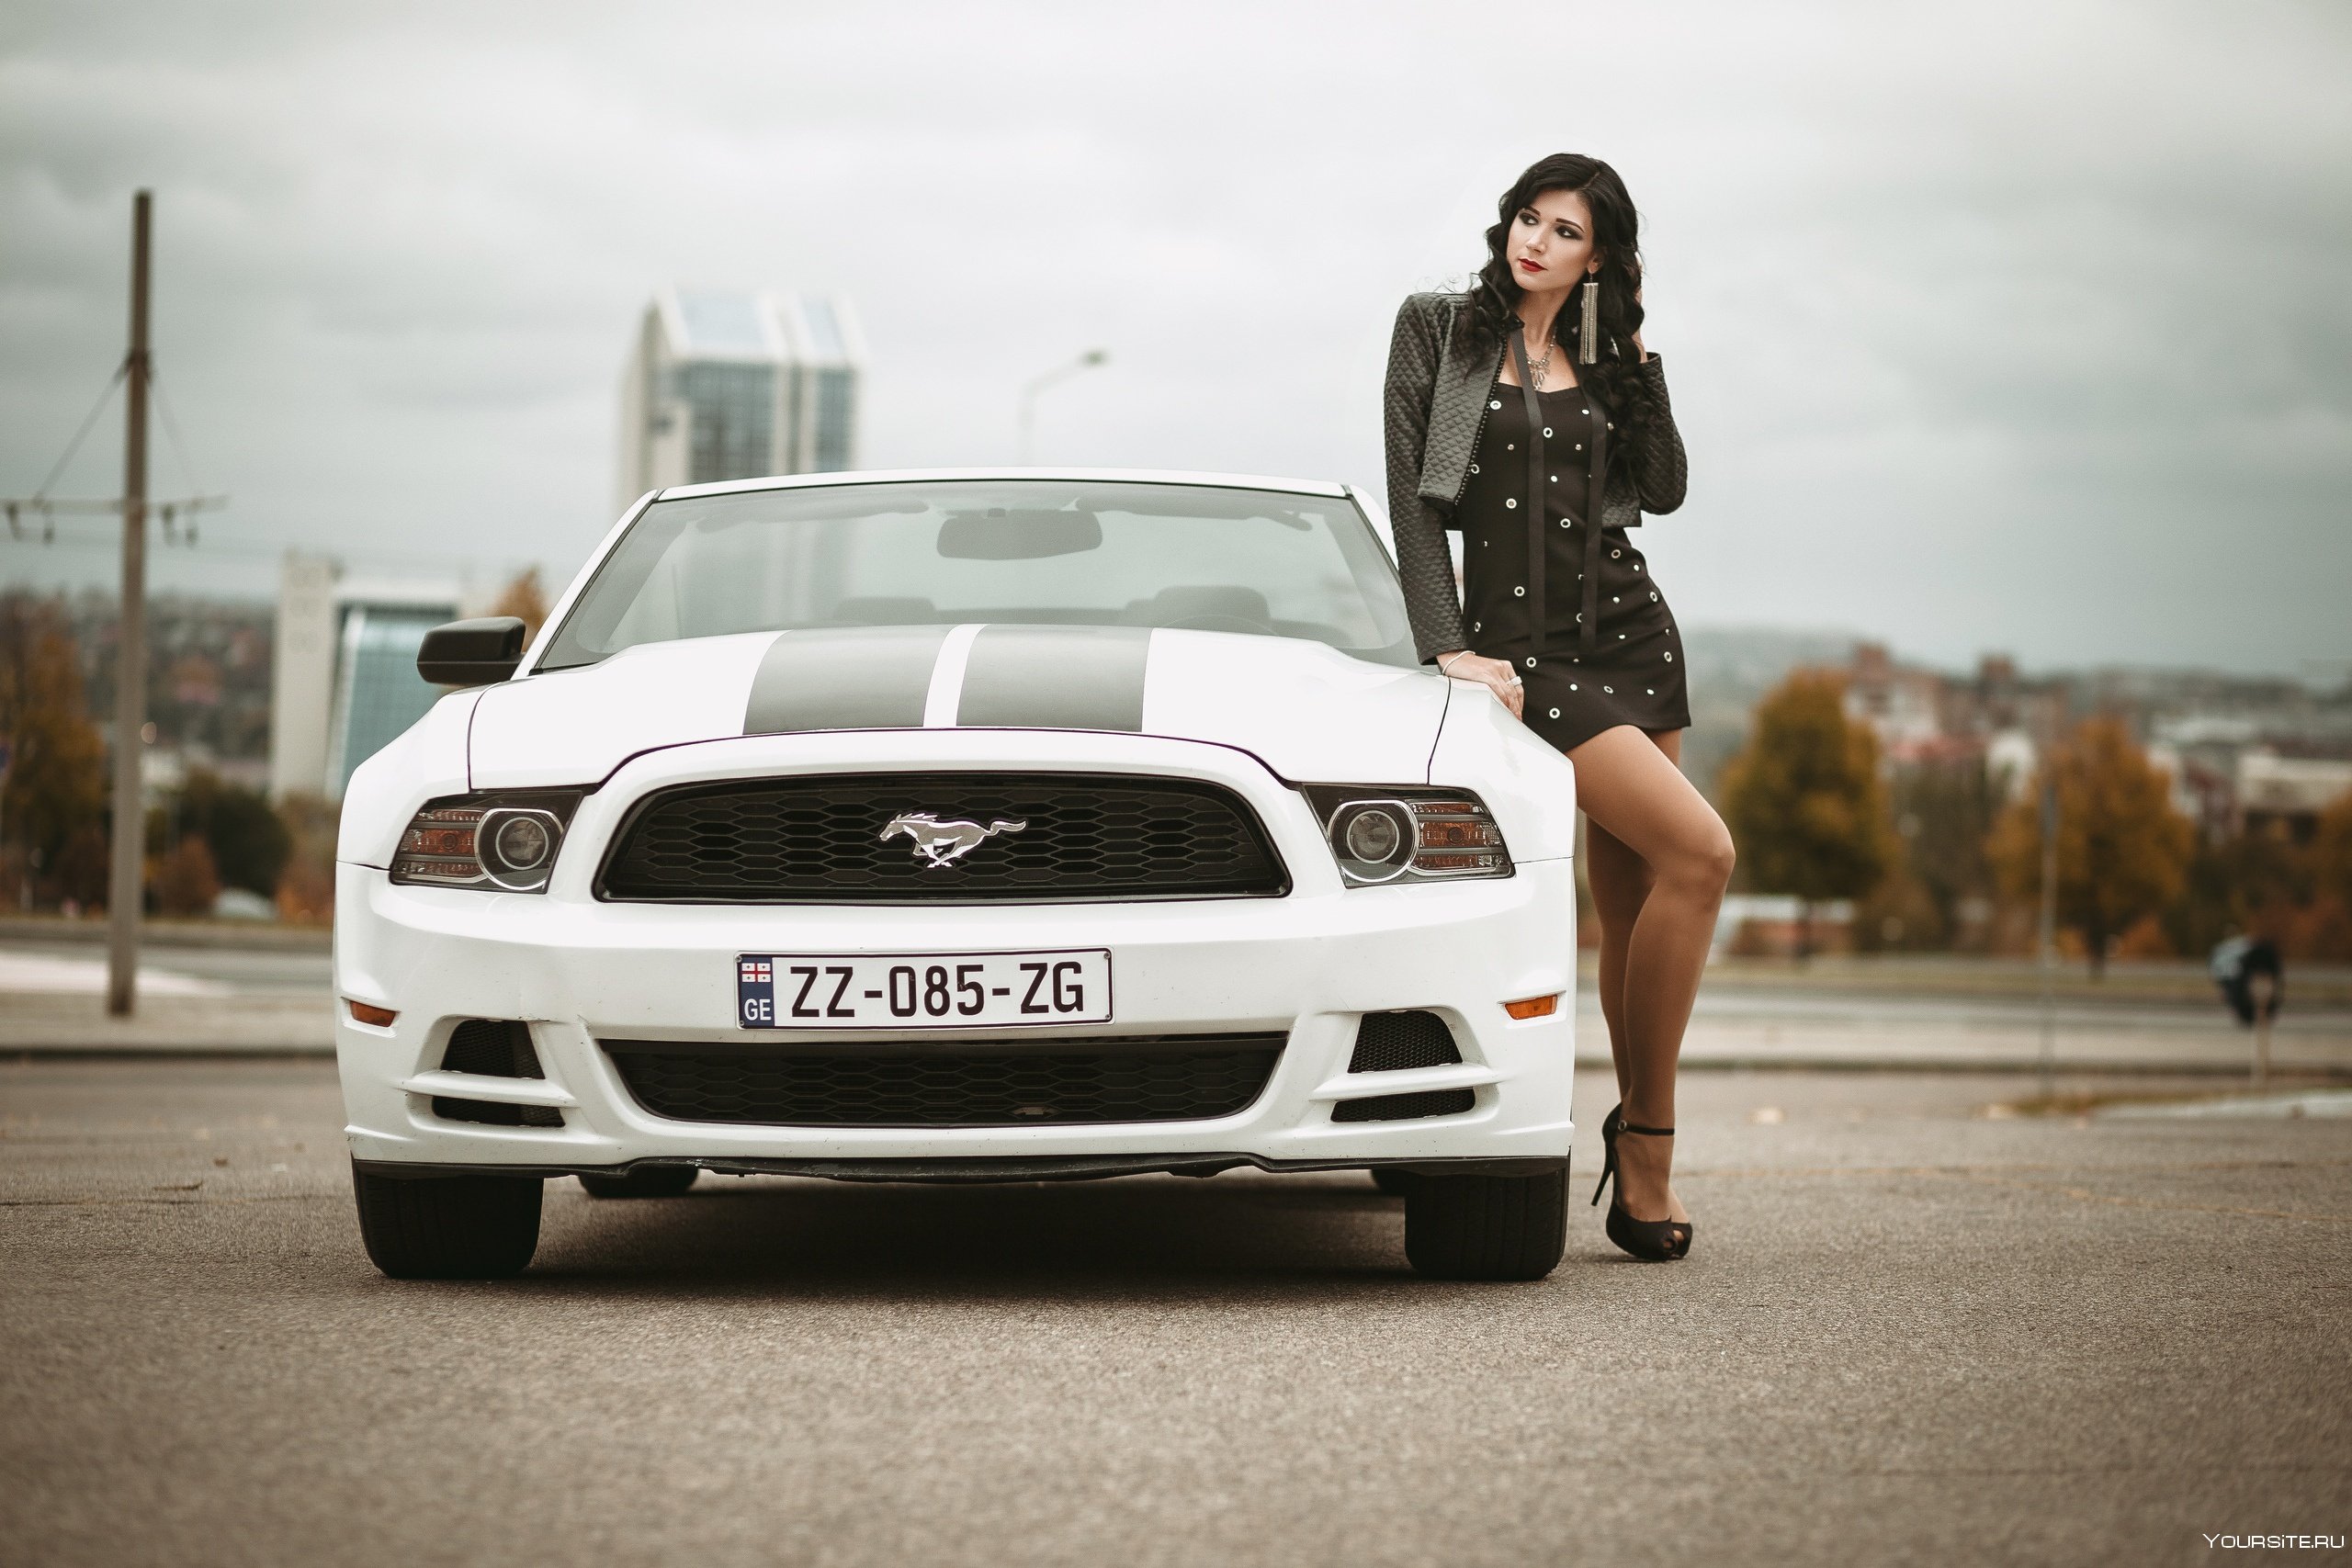 One of the girls streets white mustang. Девушка в машине. Девушки и авто. Красивые девушки и автомобили. Красивые машины для девушек.